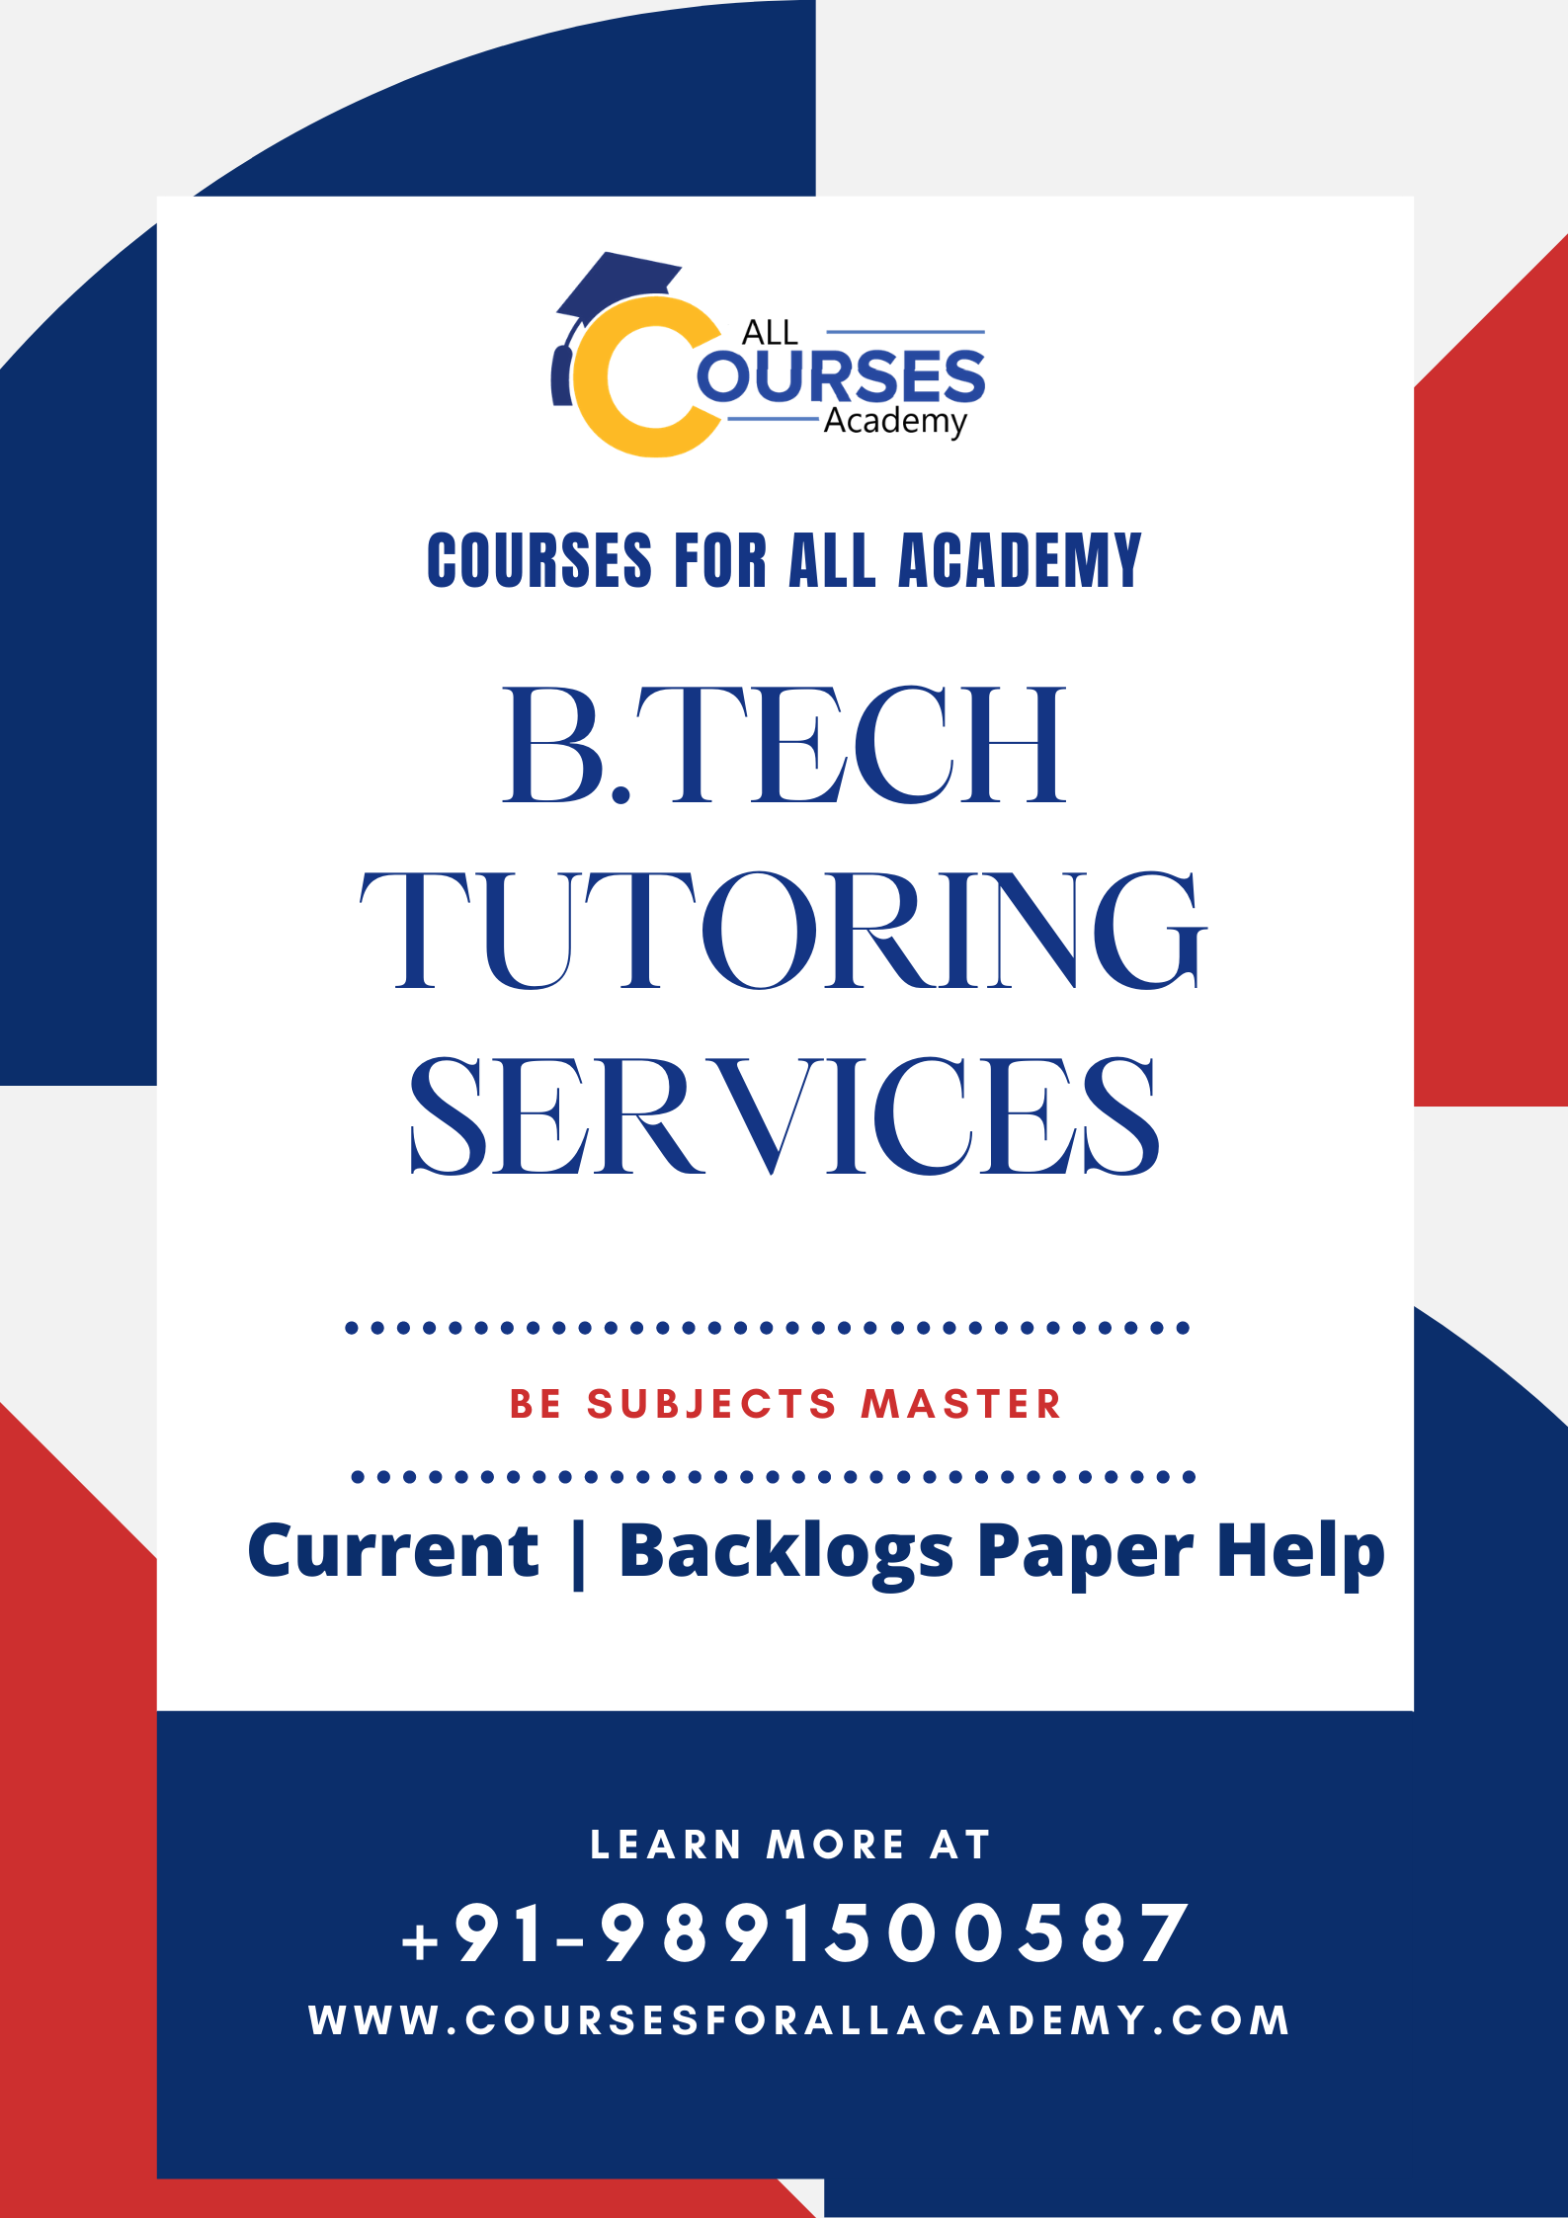 Online Back Paper Tuition Of BTech